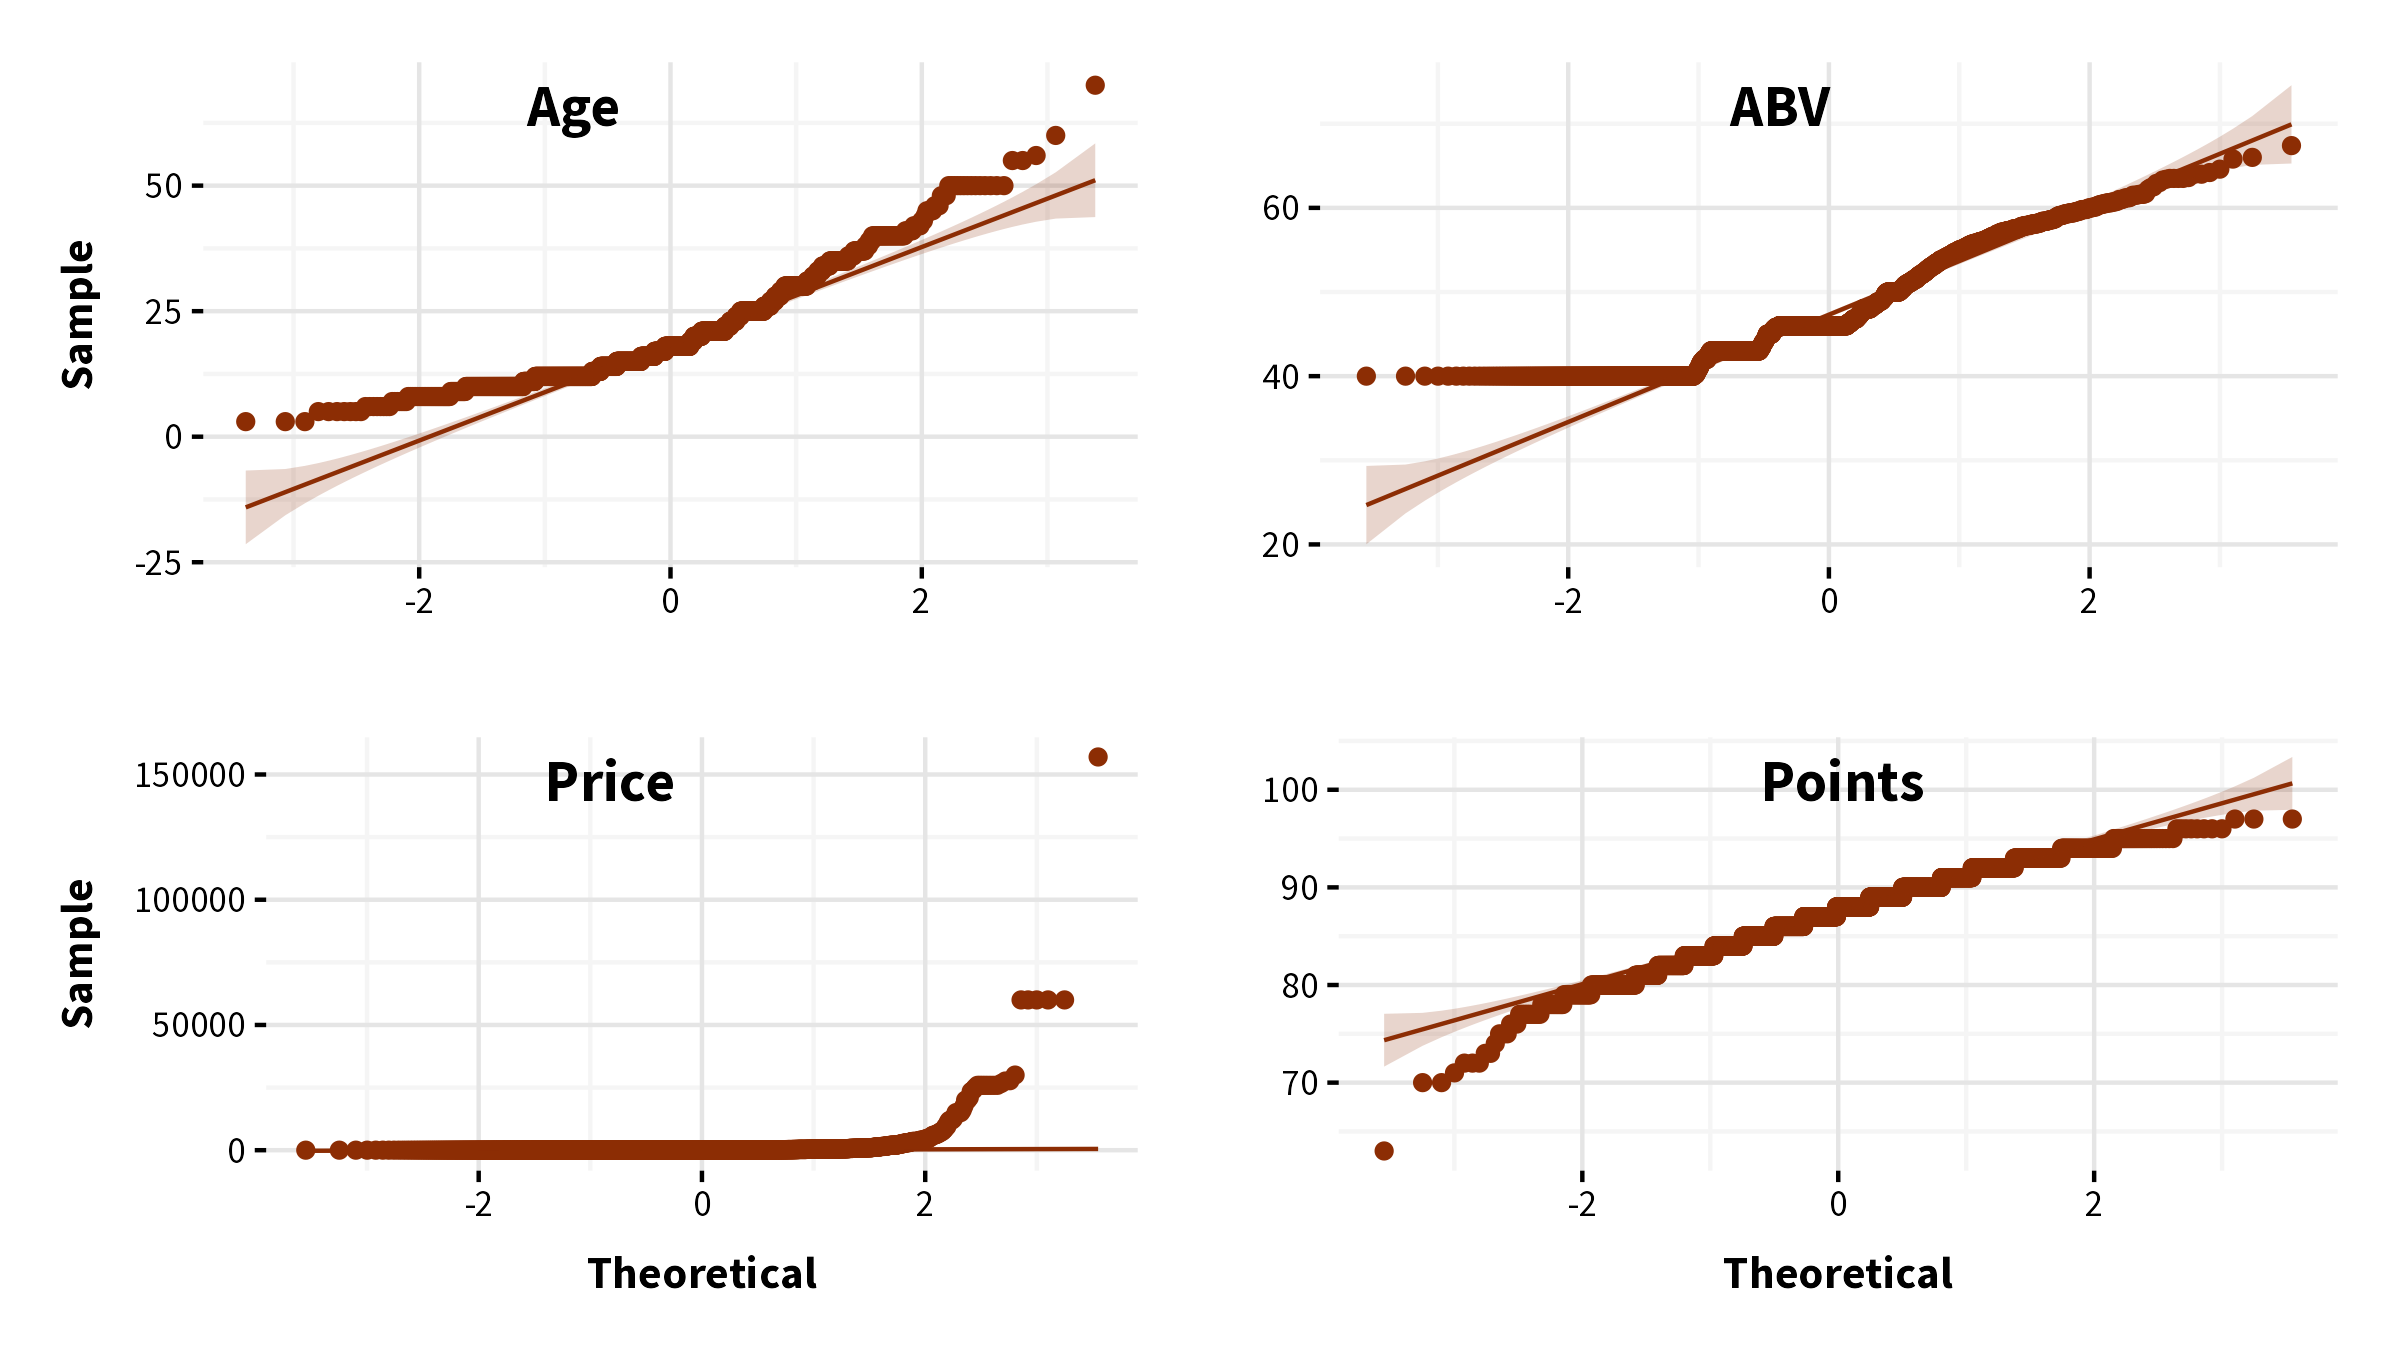 QQ plots for age, ABV, price, and points.